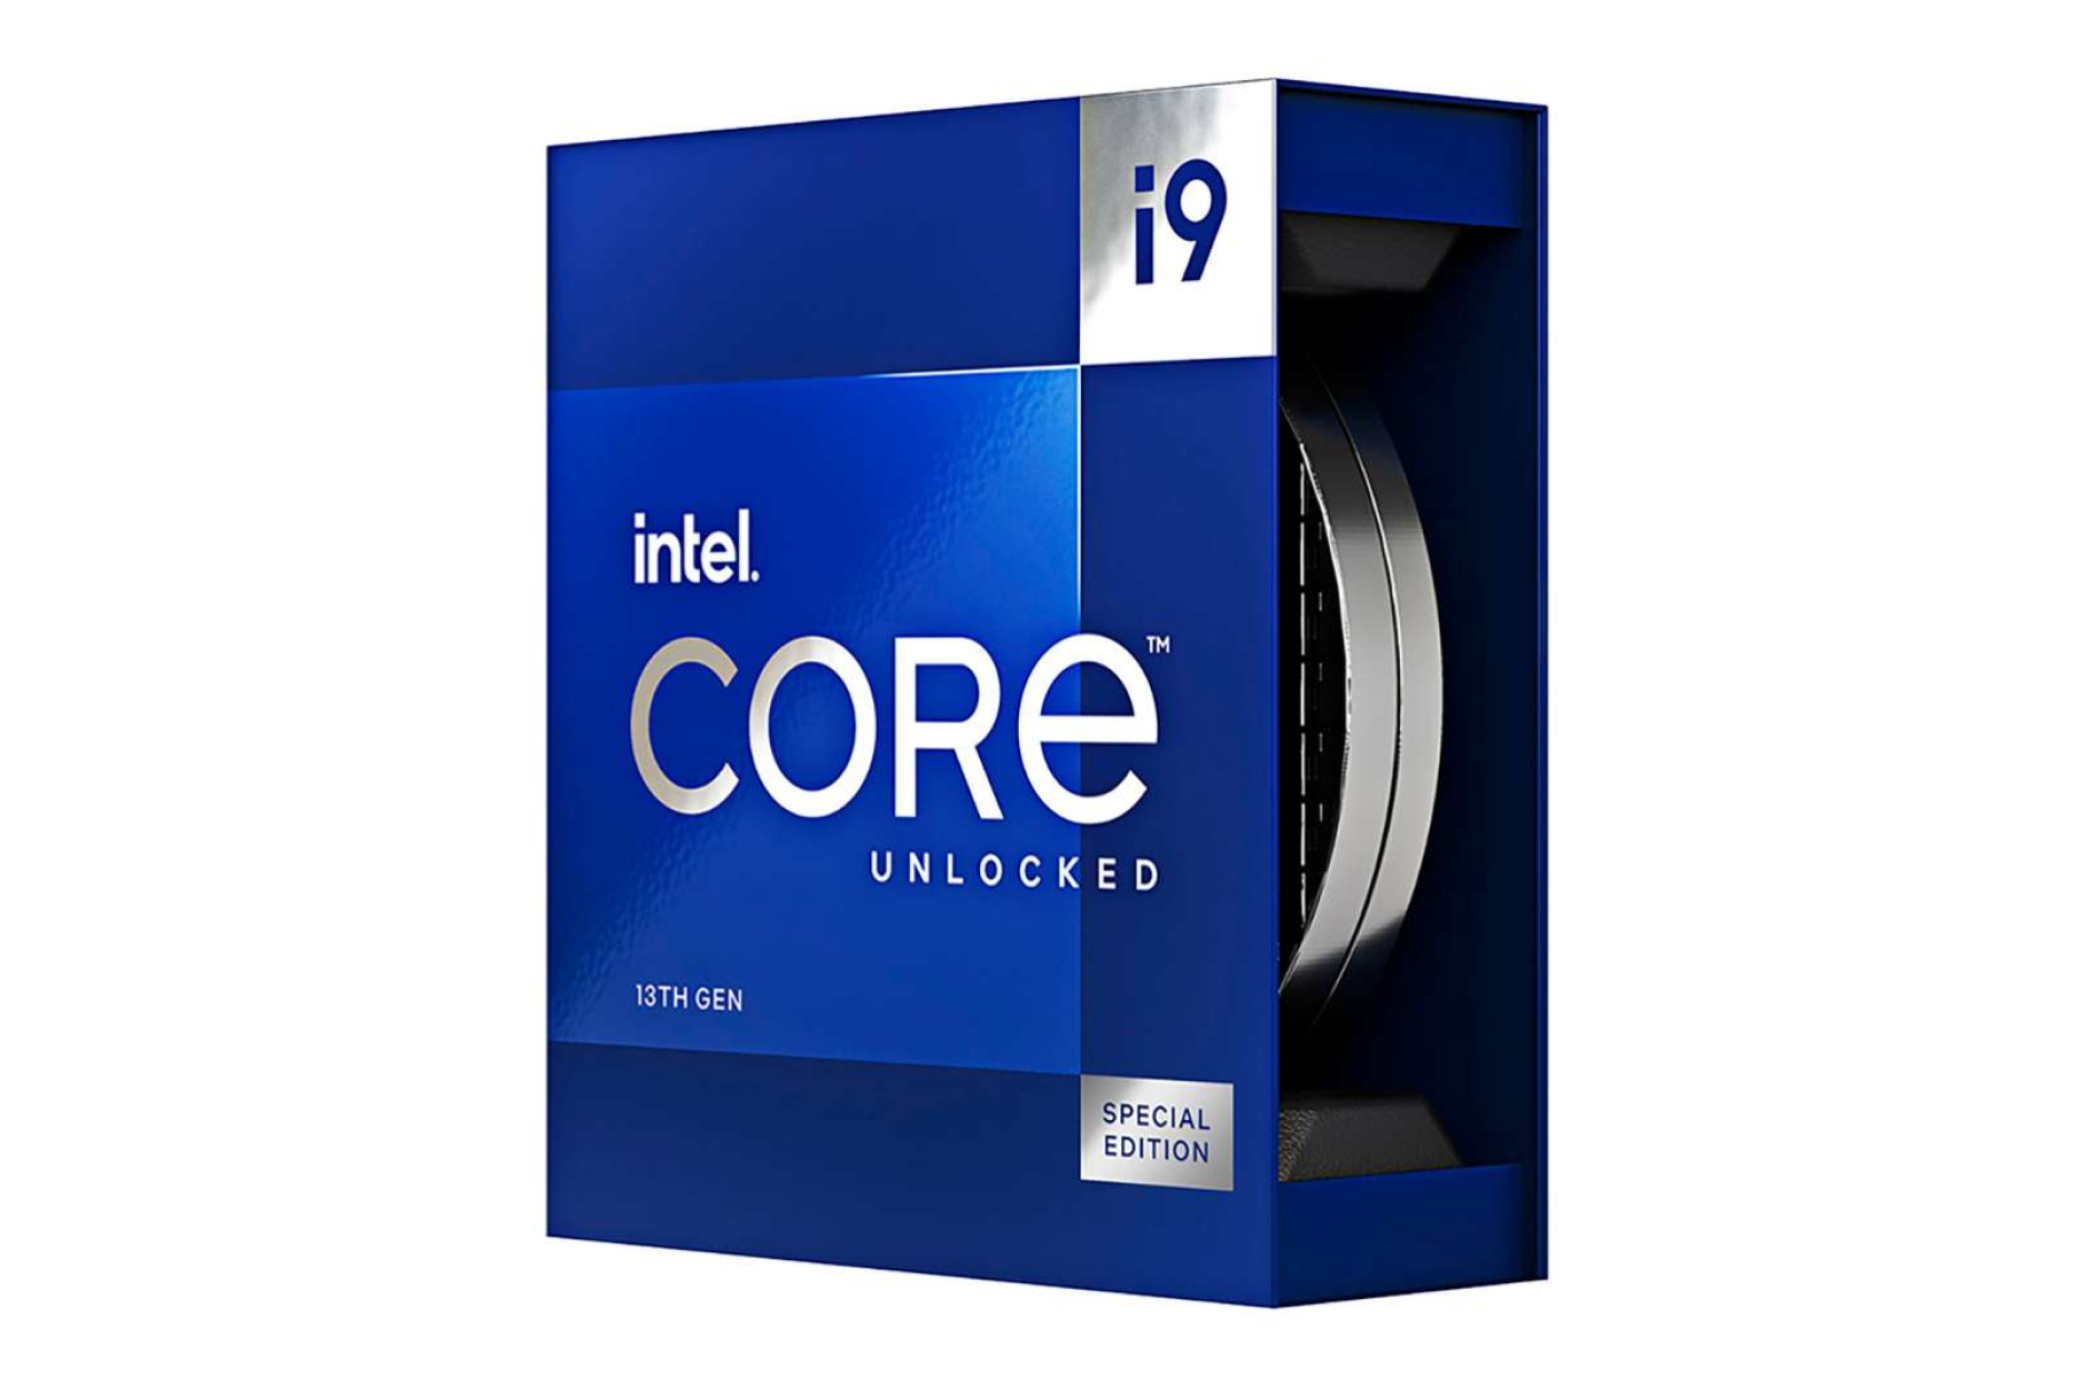 The packaging of the Core i9-13900KS.